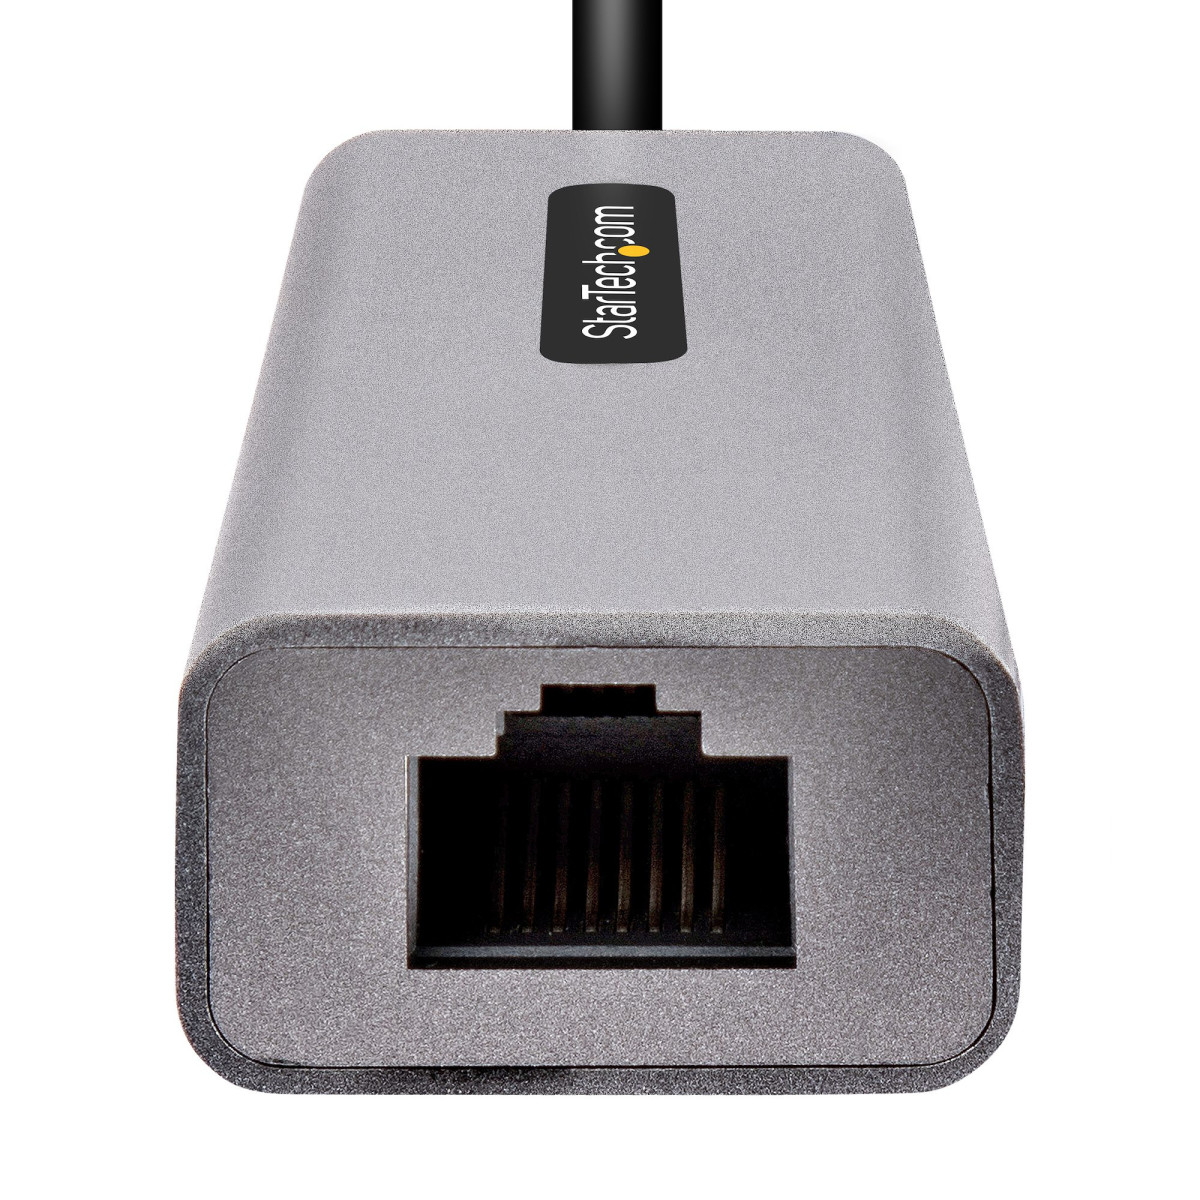 USB-C to Ethernet Adapter GbE Adapter